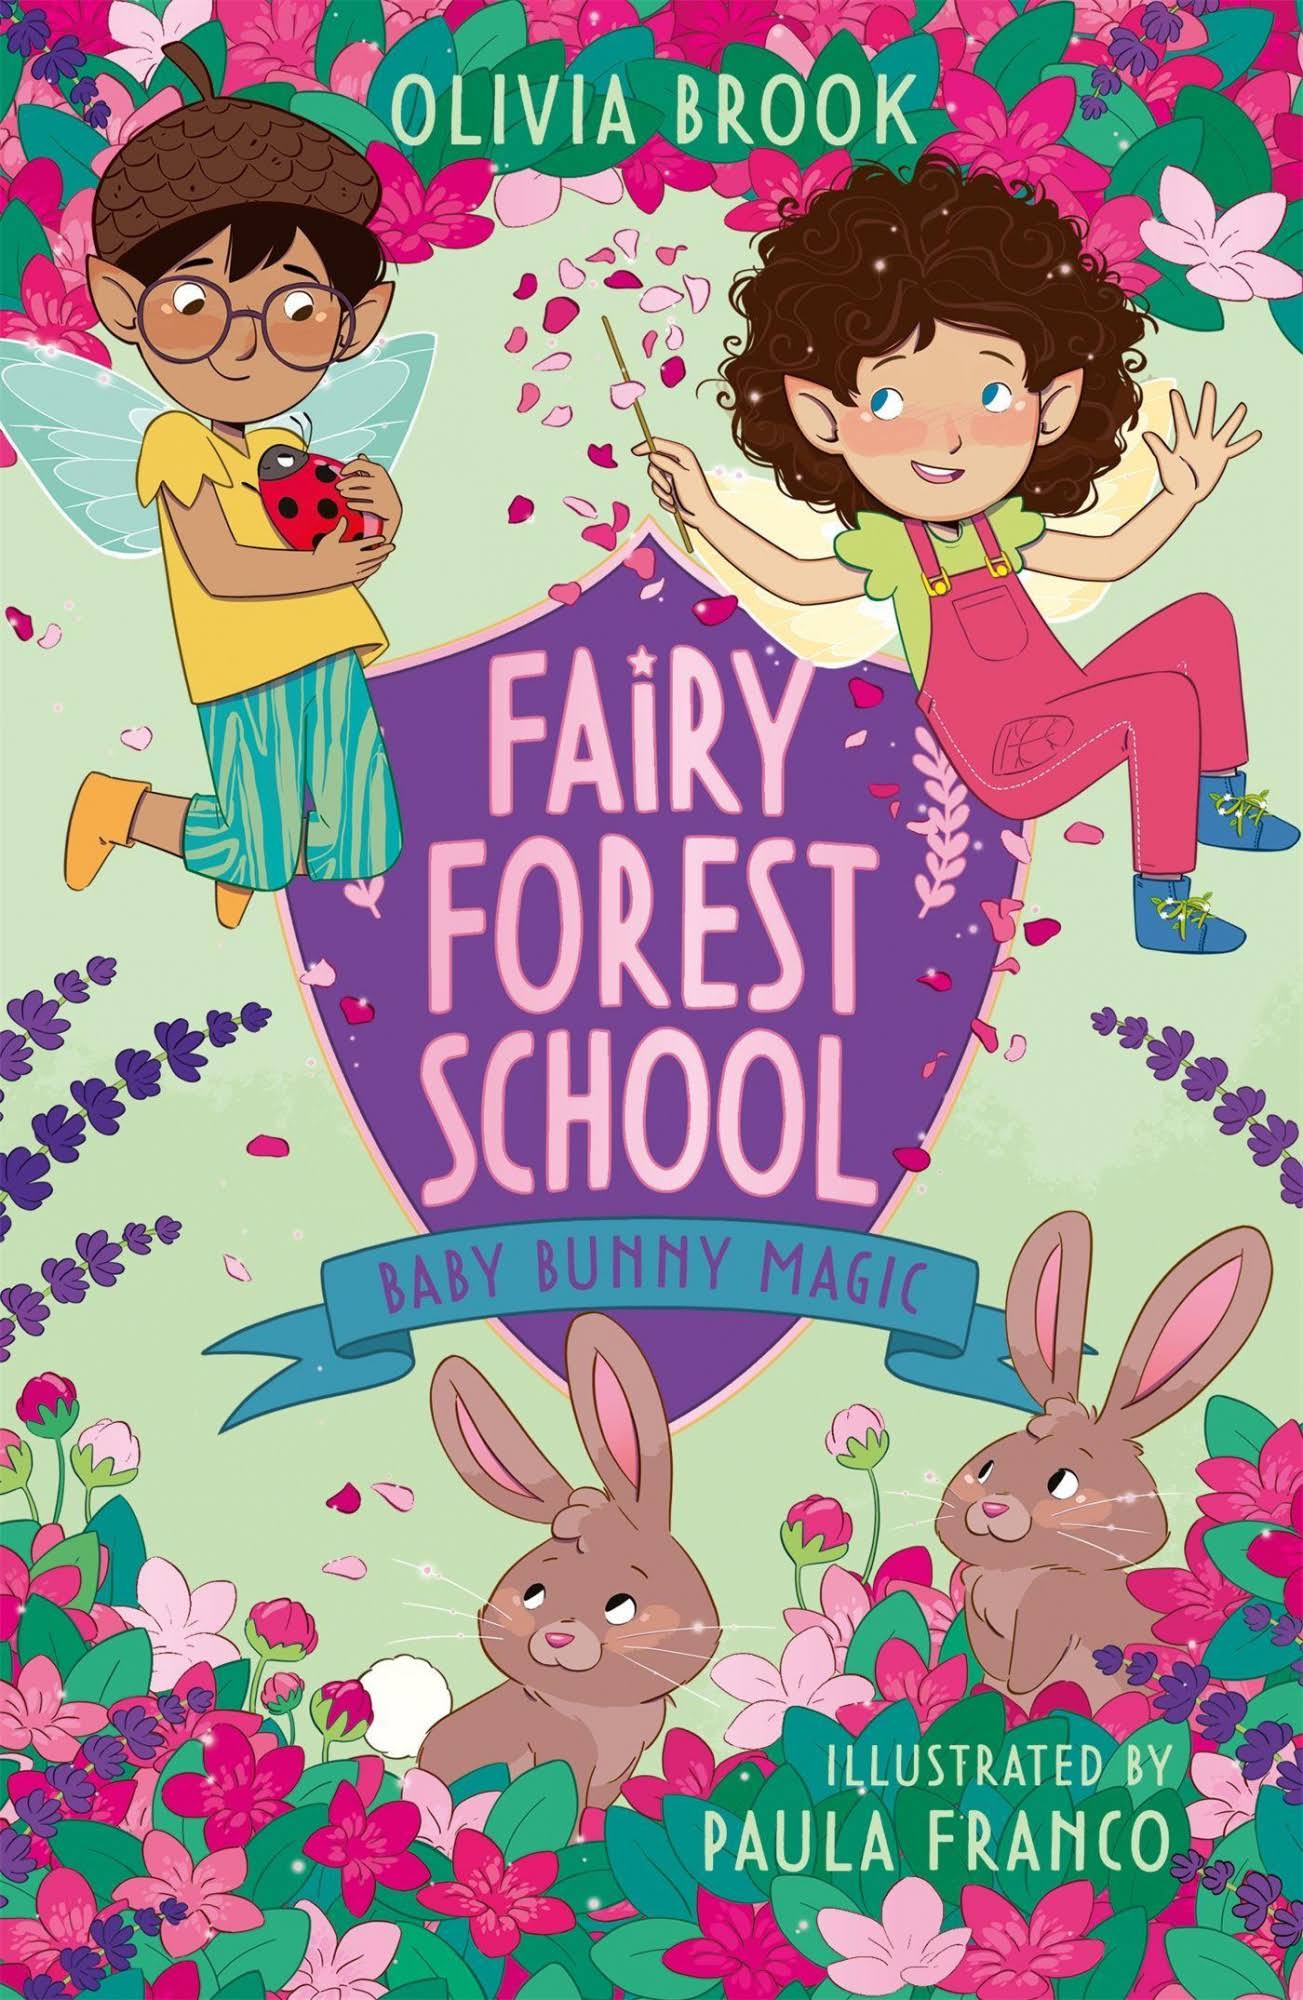 Fairy Forest School Baby Bunny Magic by Olivia Brook